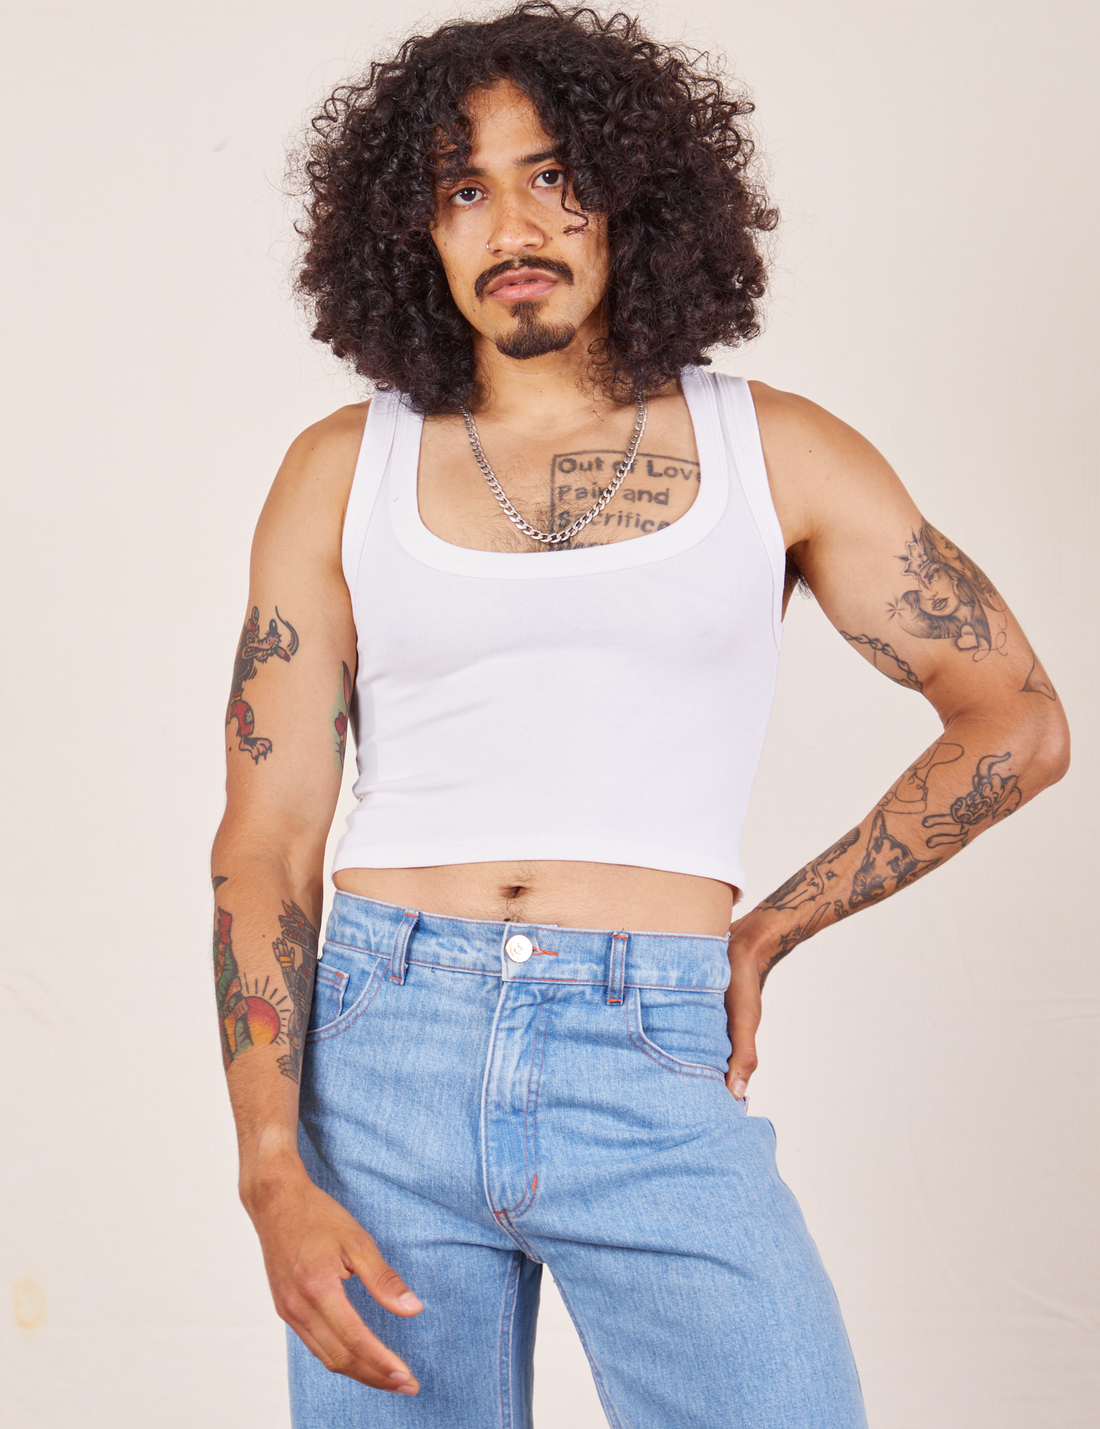 Jesse is 5'8" and wearing XS Cropped Tank Top in Vintage Off-White